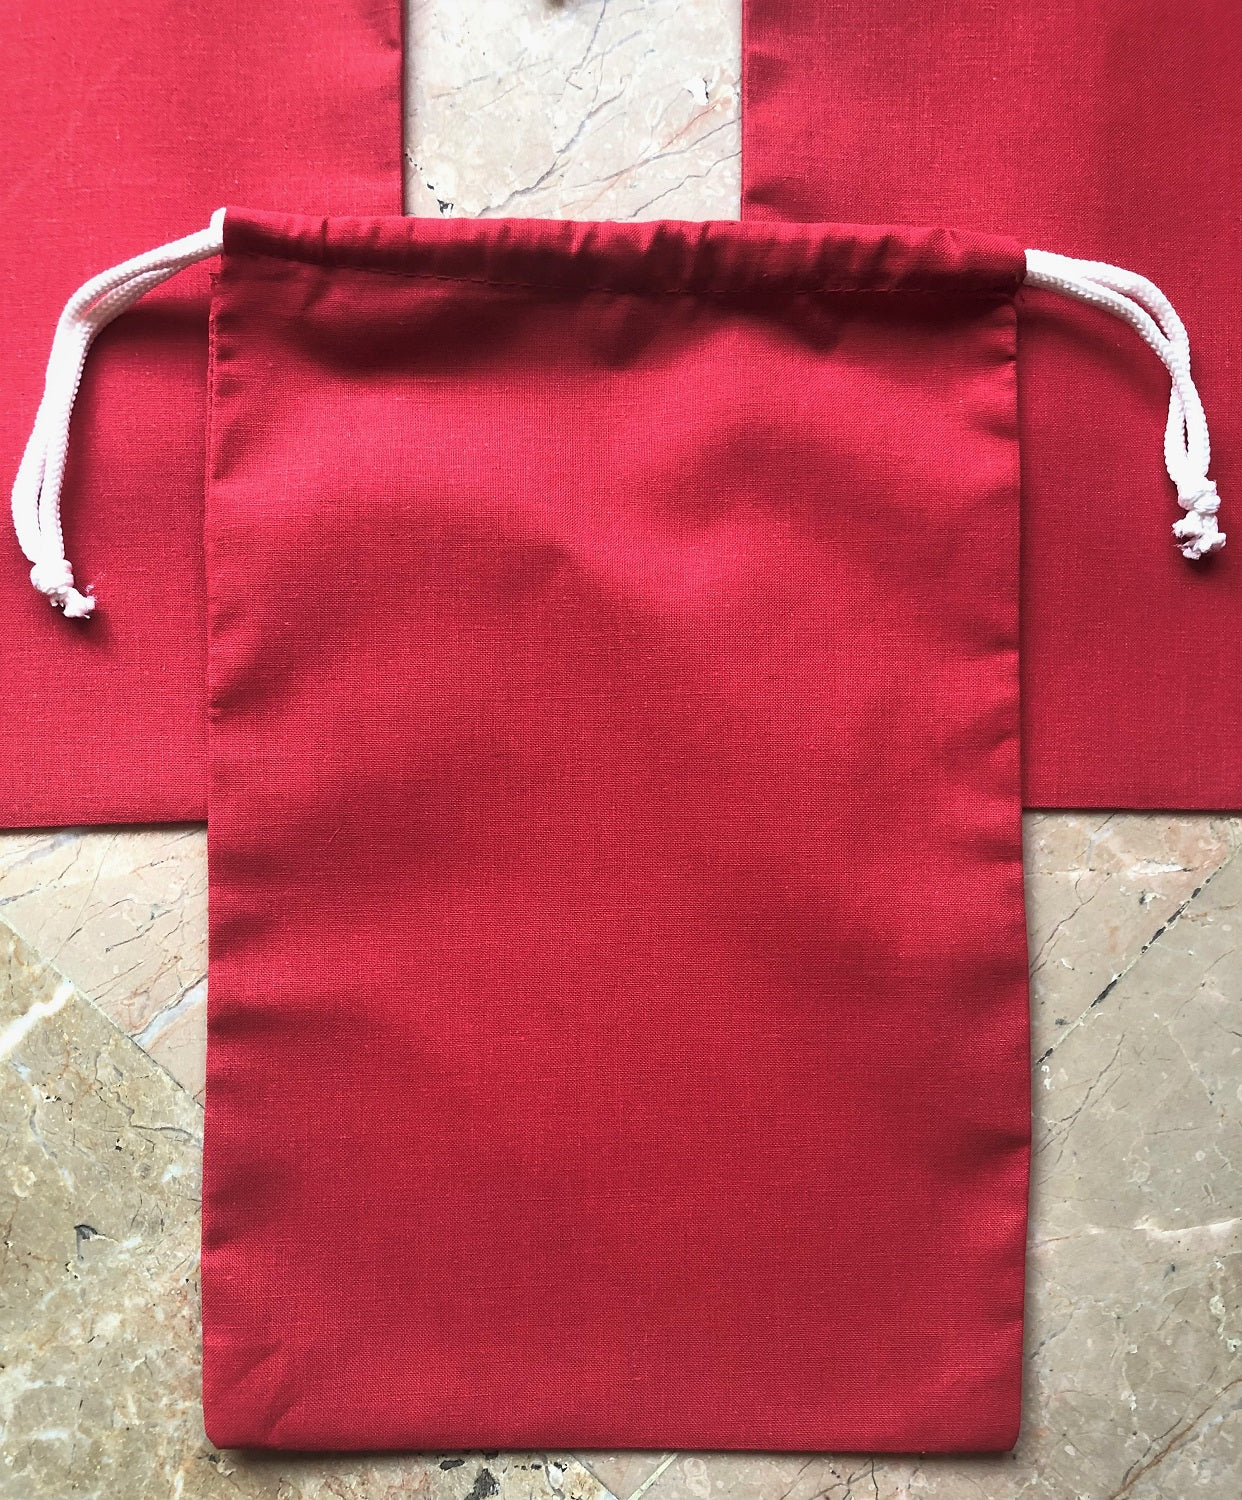 8x12 Inches Reusable Eco-Friendly Cotton Double Drawstring Bags Red Color